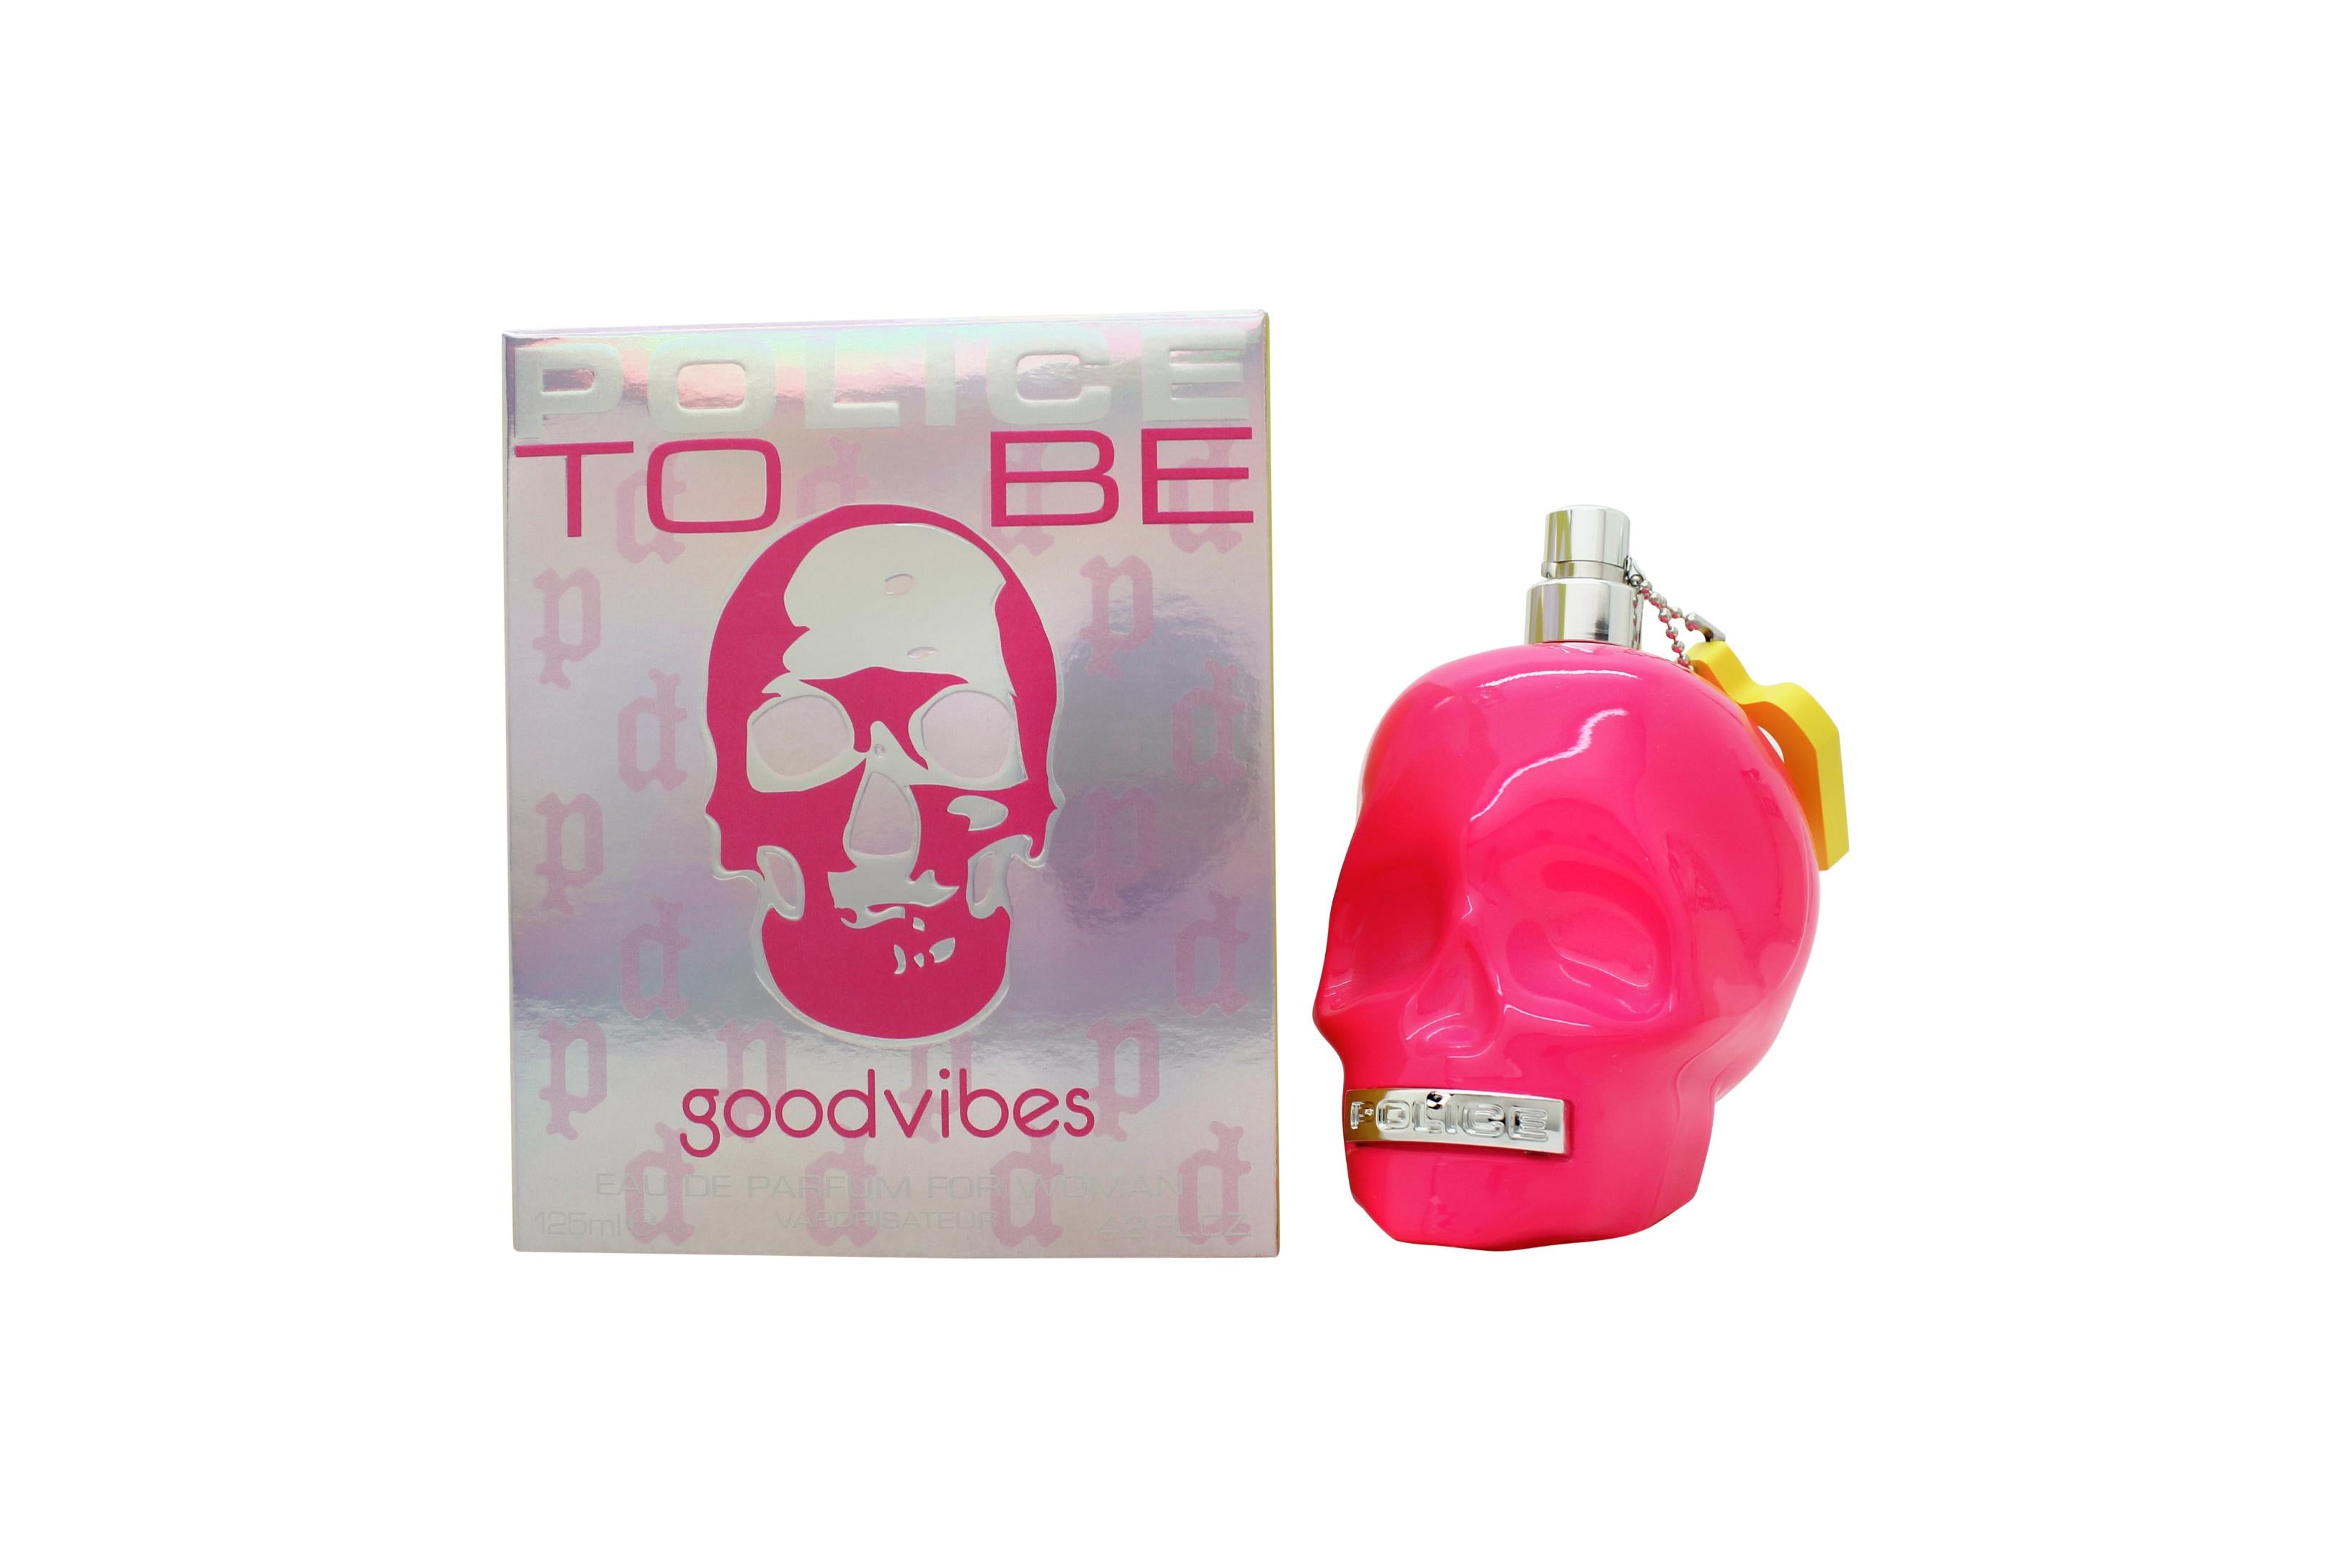 View Police To Be Goodvibes For Her Eau de Parfum 125ml Spray information